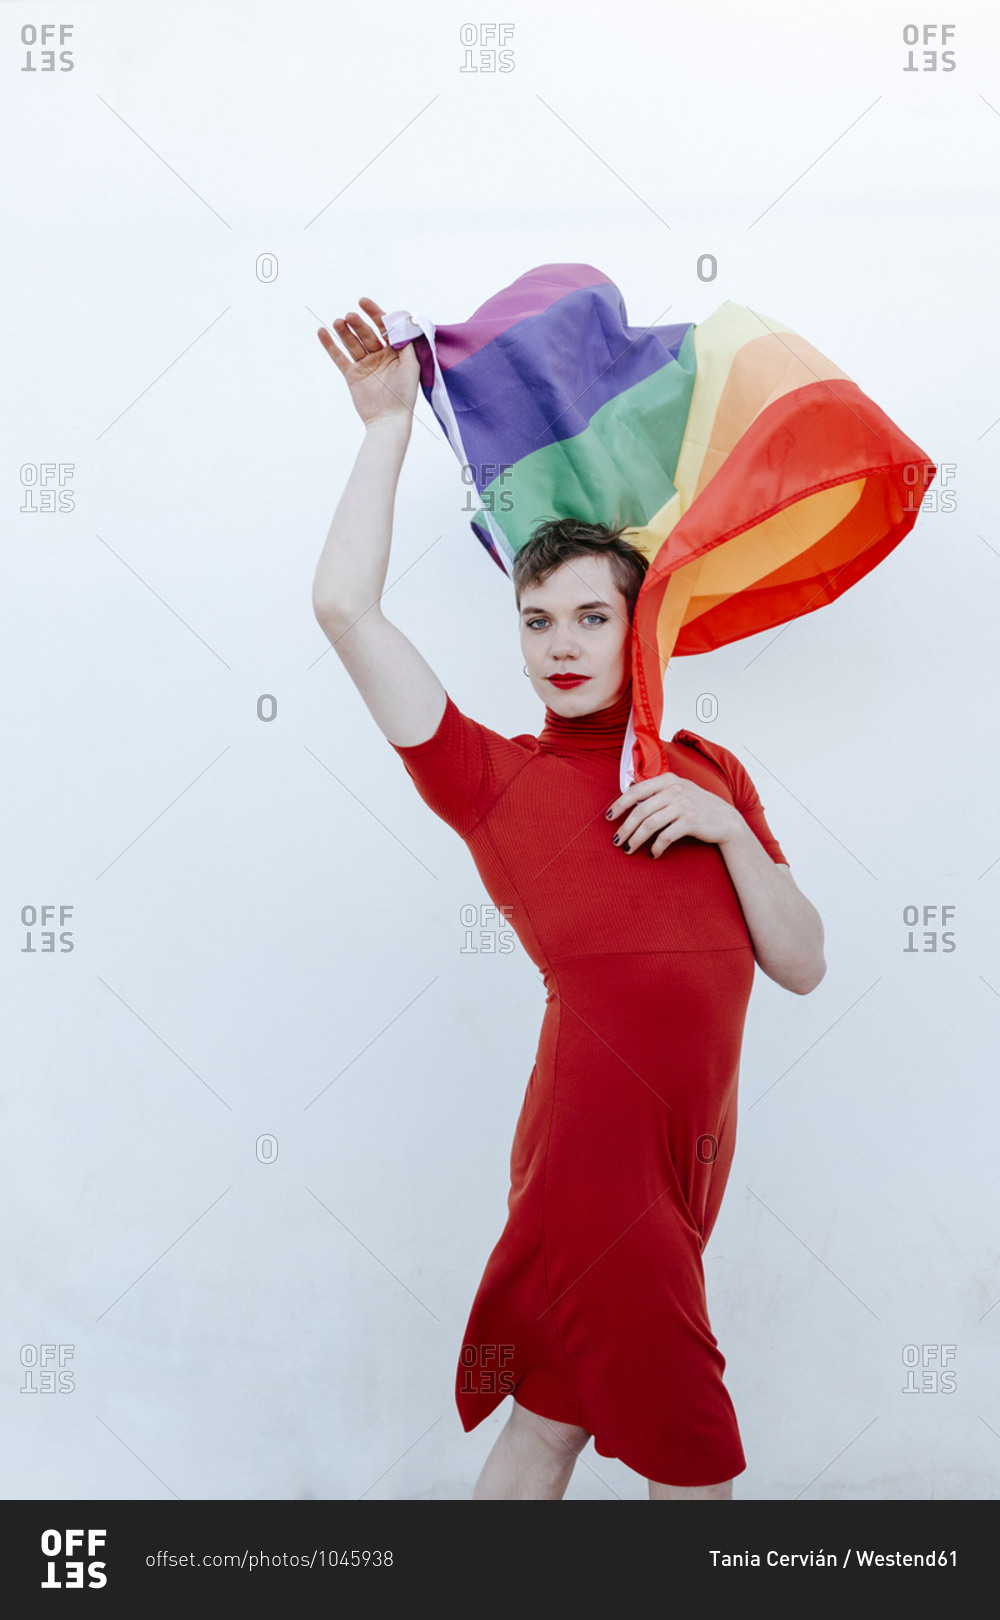 Non-Binary person waving rainbow flag while standing against white background